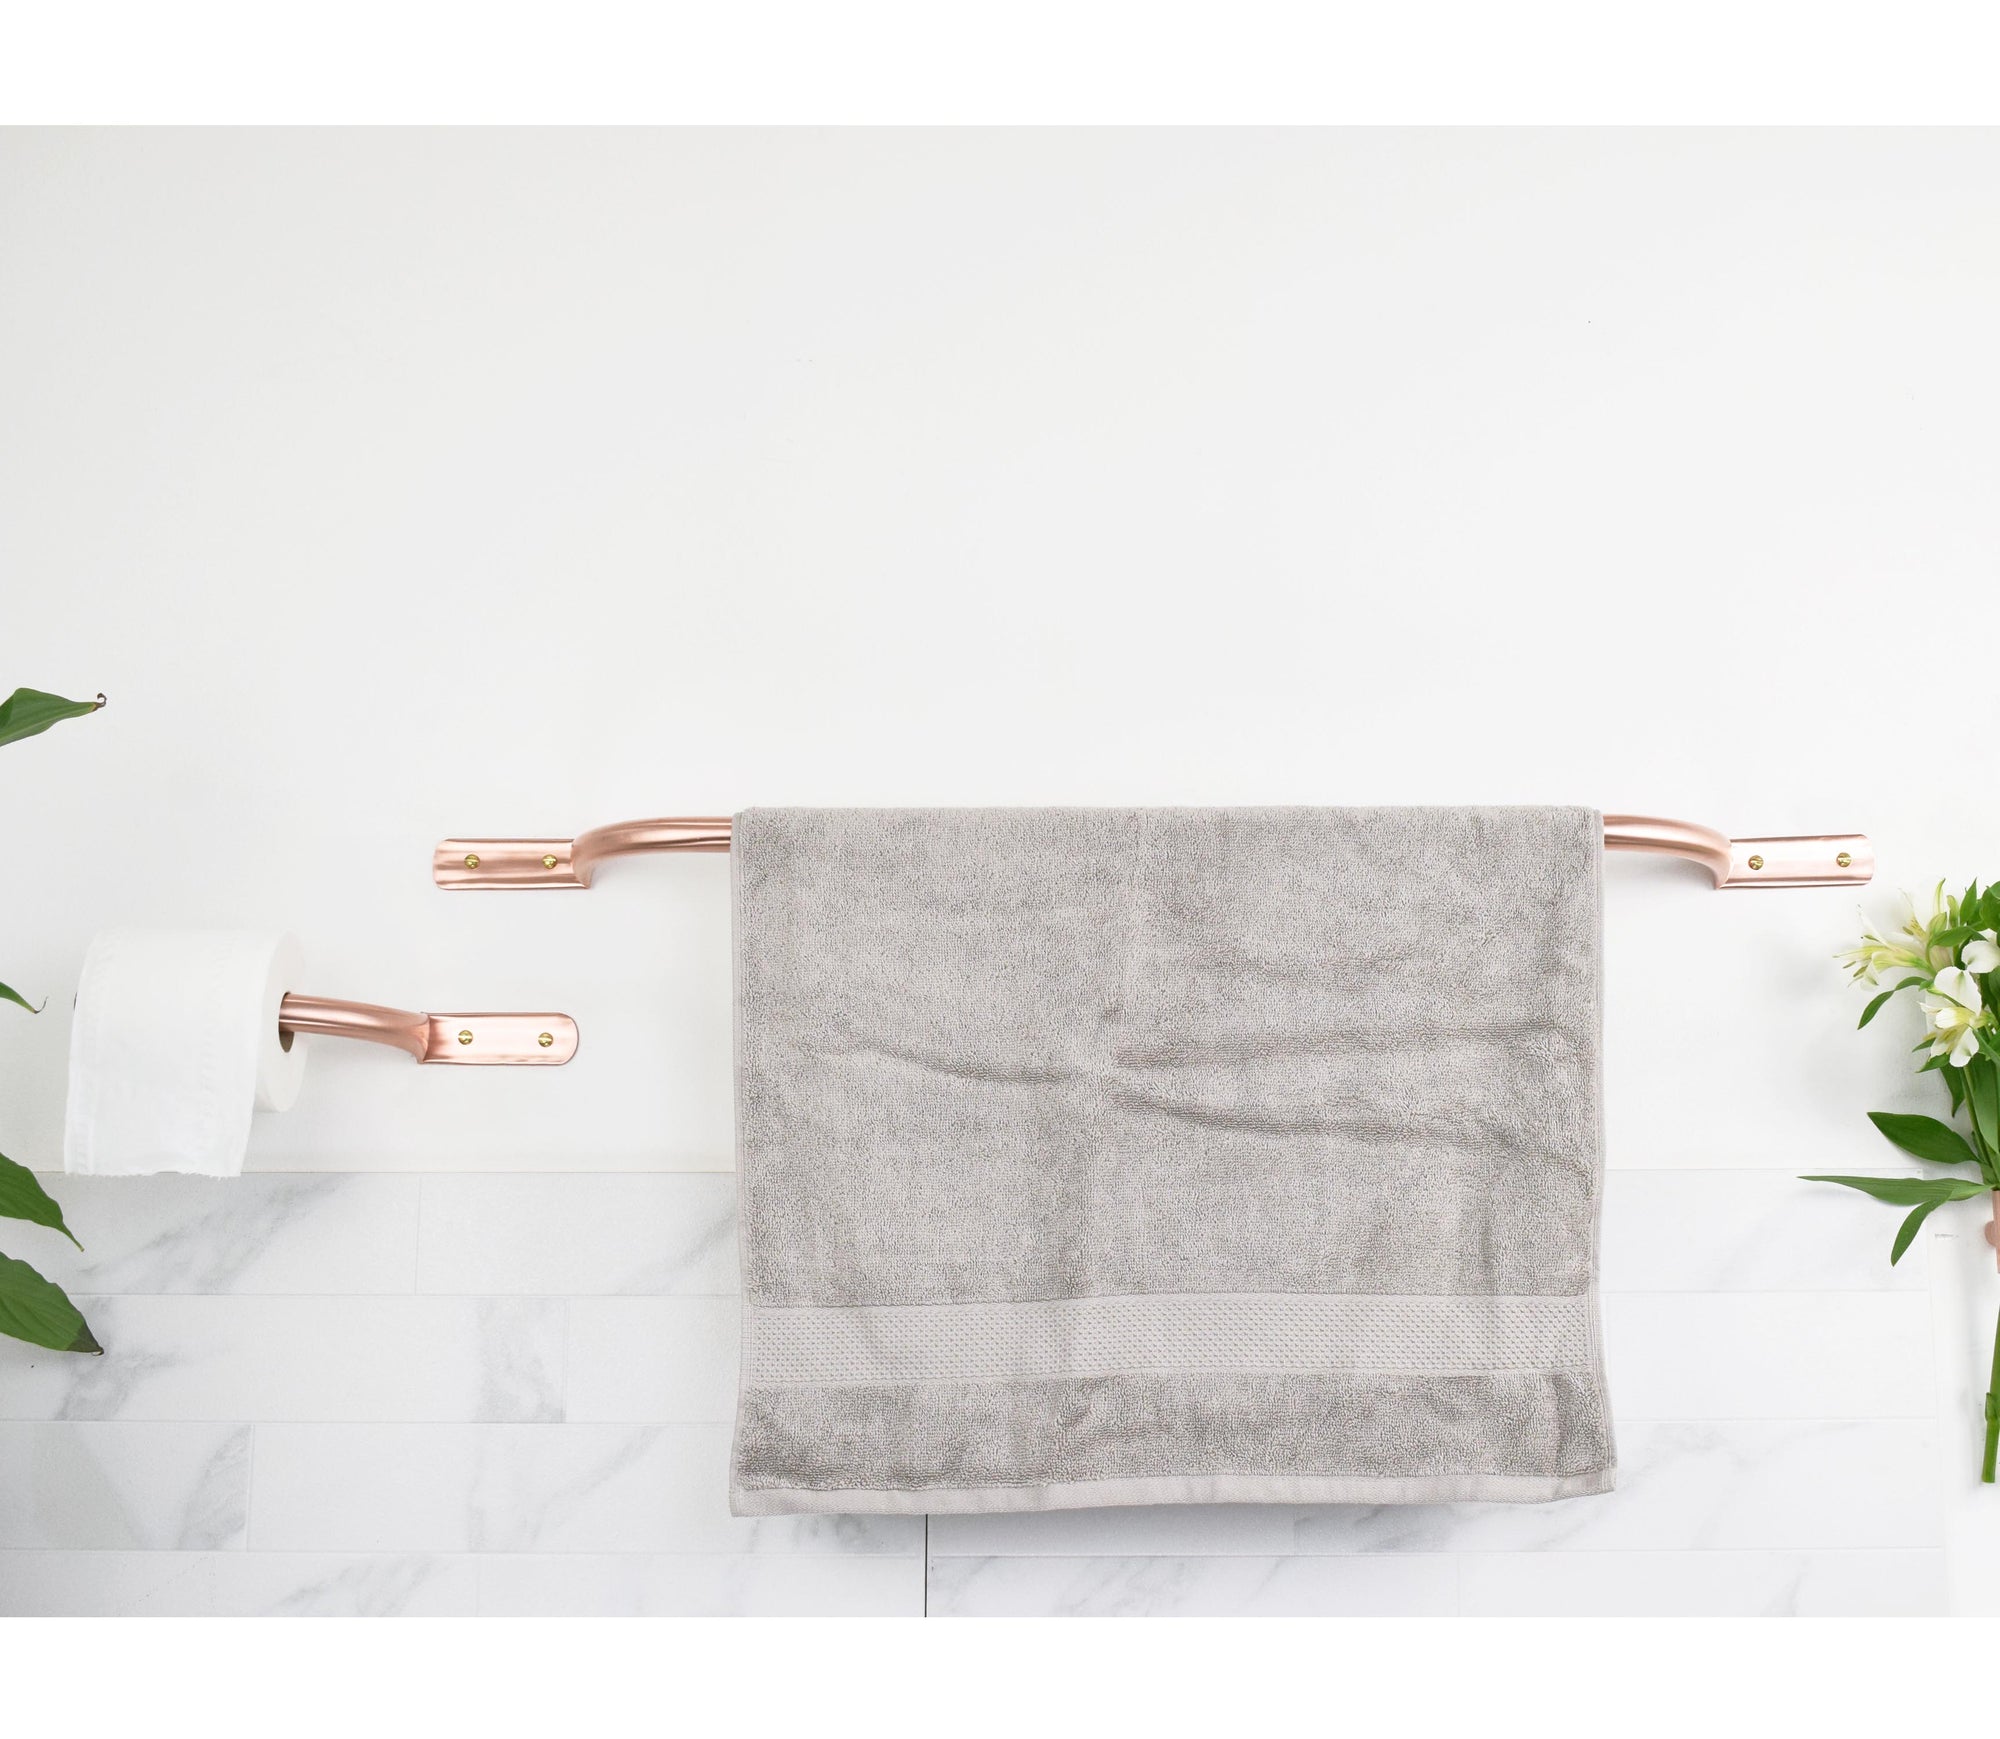 Curved Copper Bathroom Set - With towels